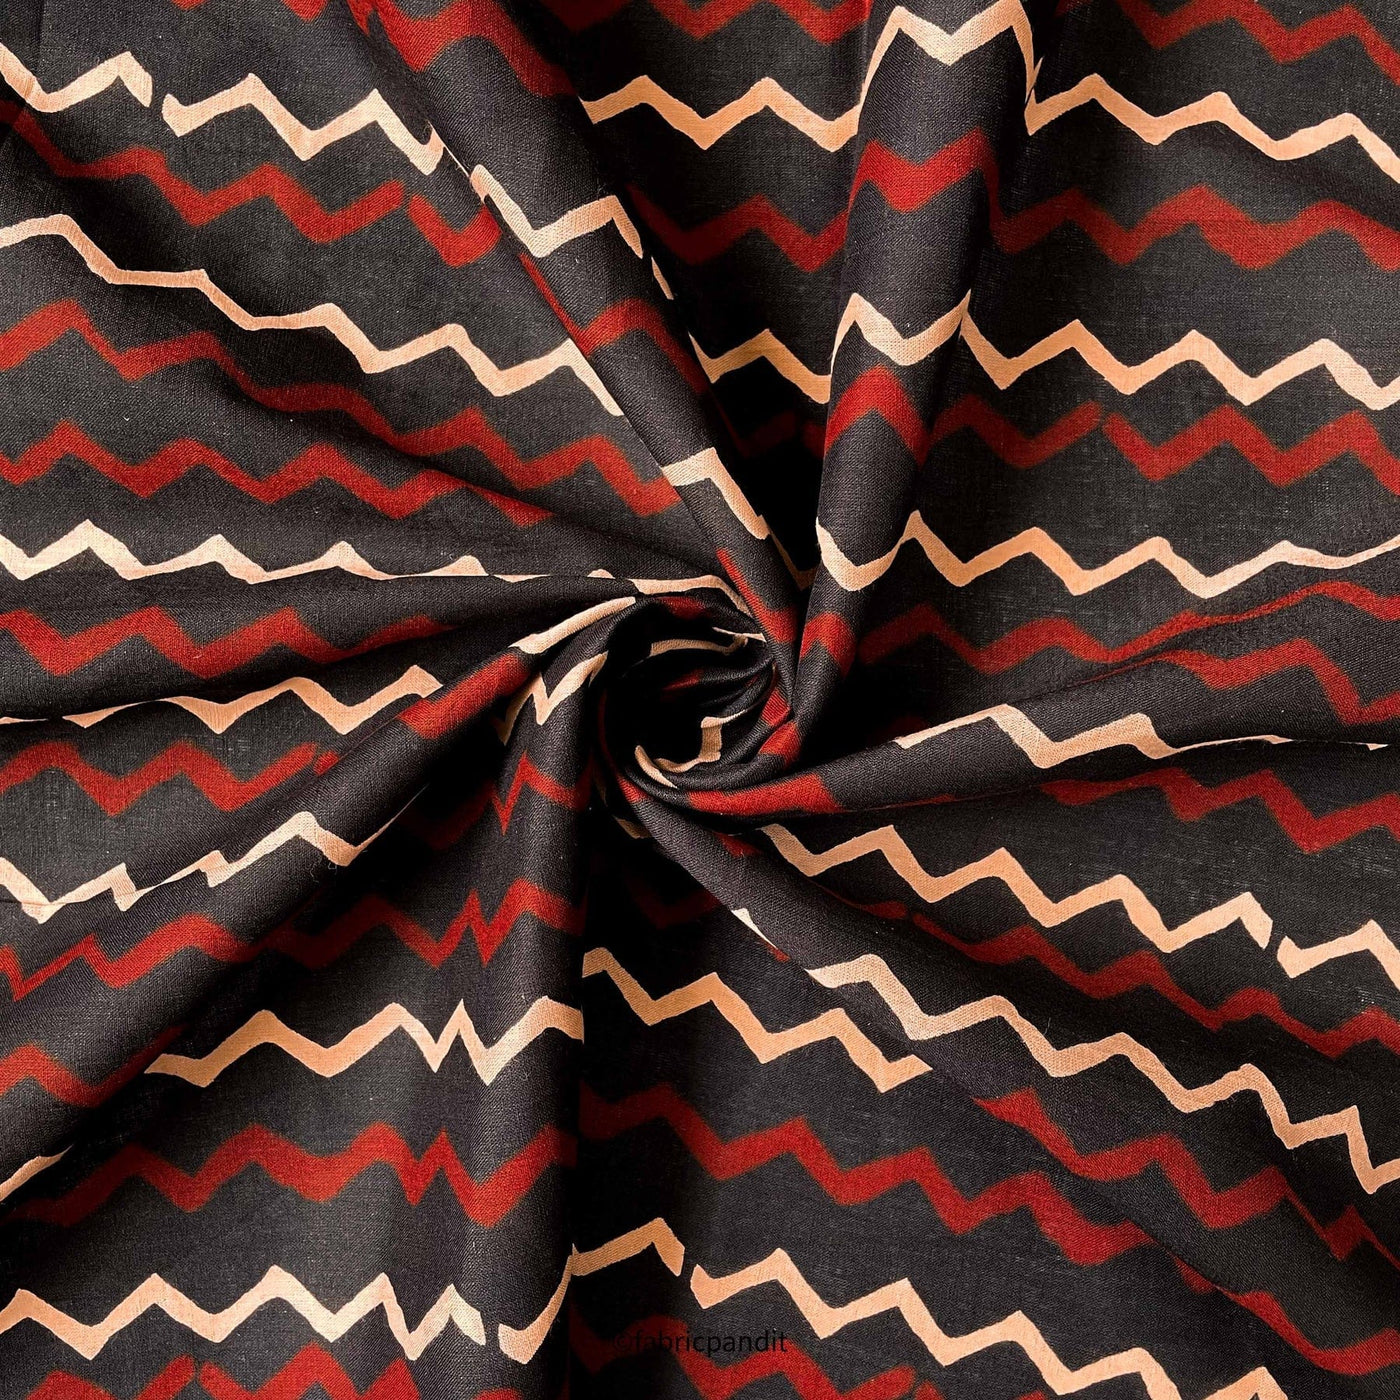 Hand Block Printed Cotton Fabric Cut Piece (CUT PIECE) Black & Red Zig- Zag Pattern Hand Block Printed Pure Cotton Fabric (Width 42 inches)